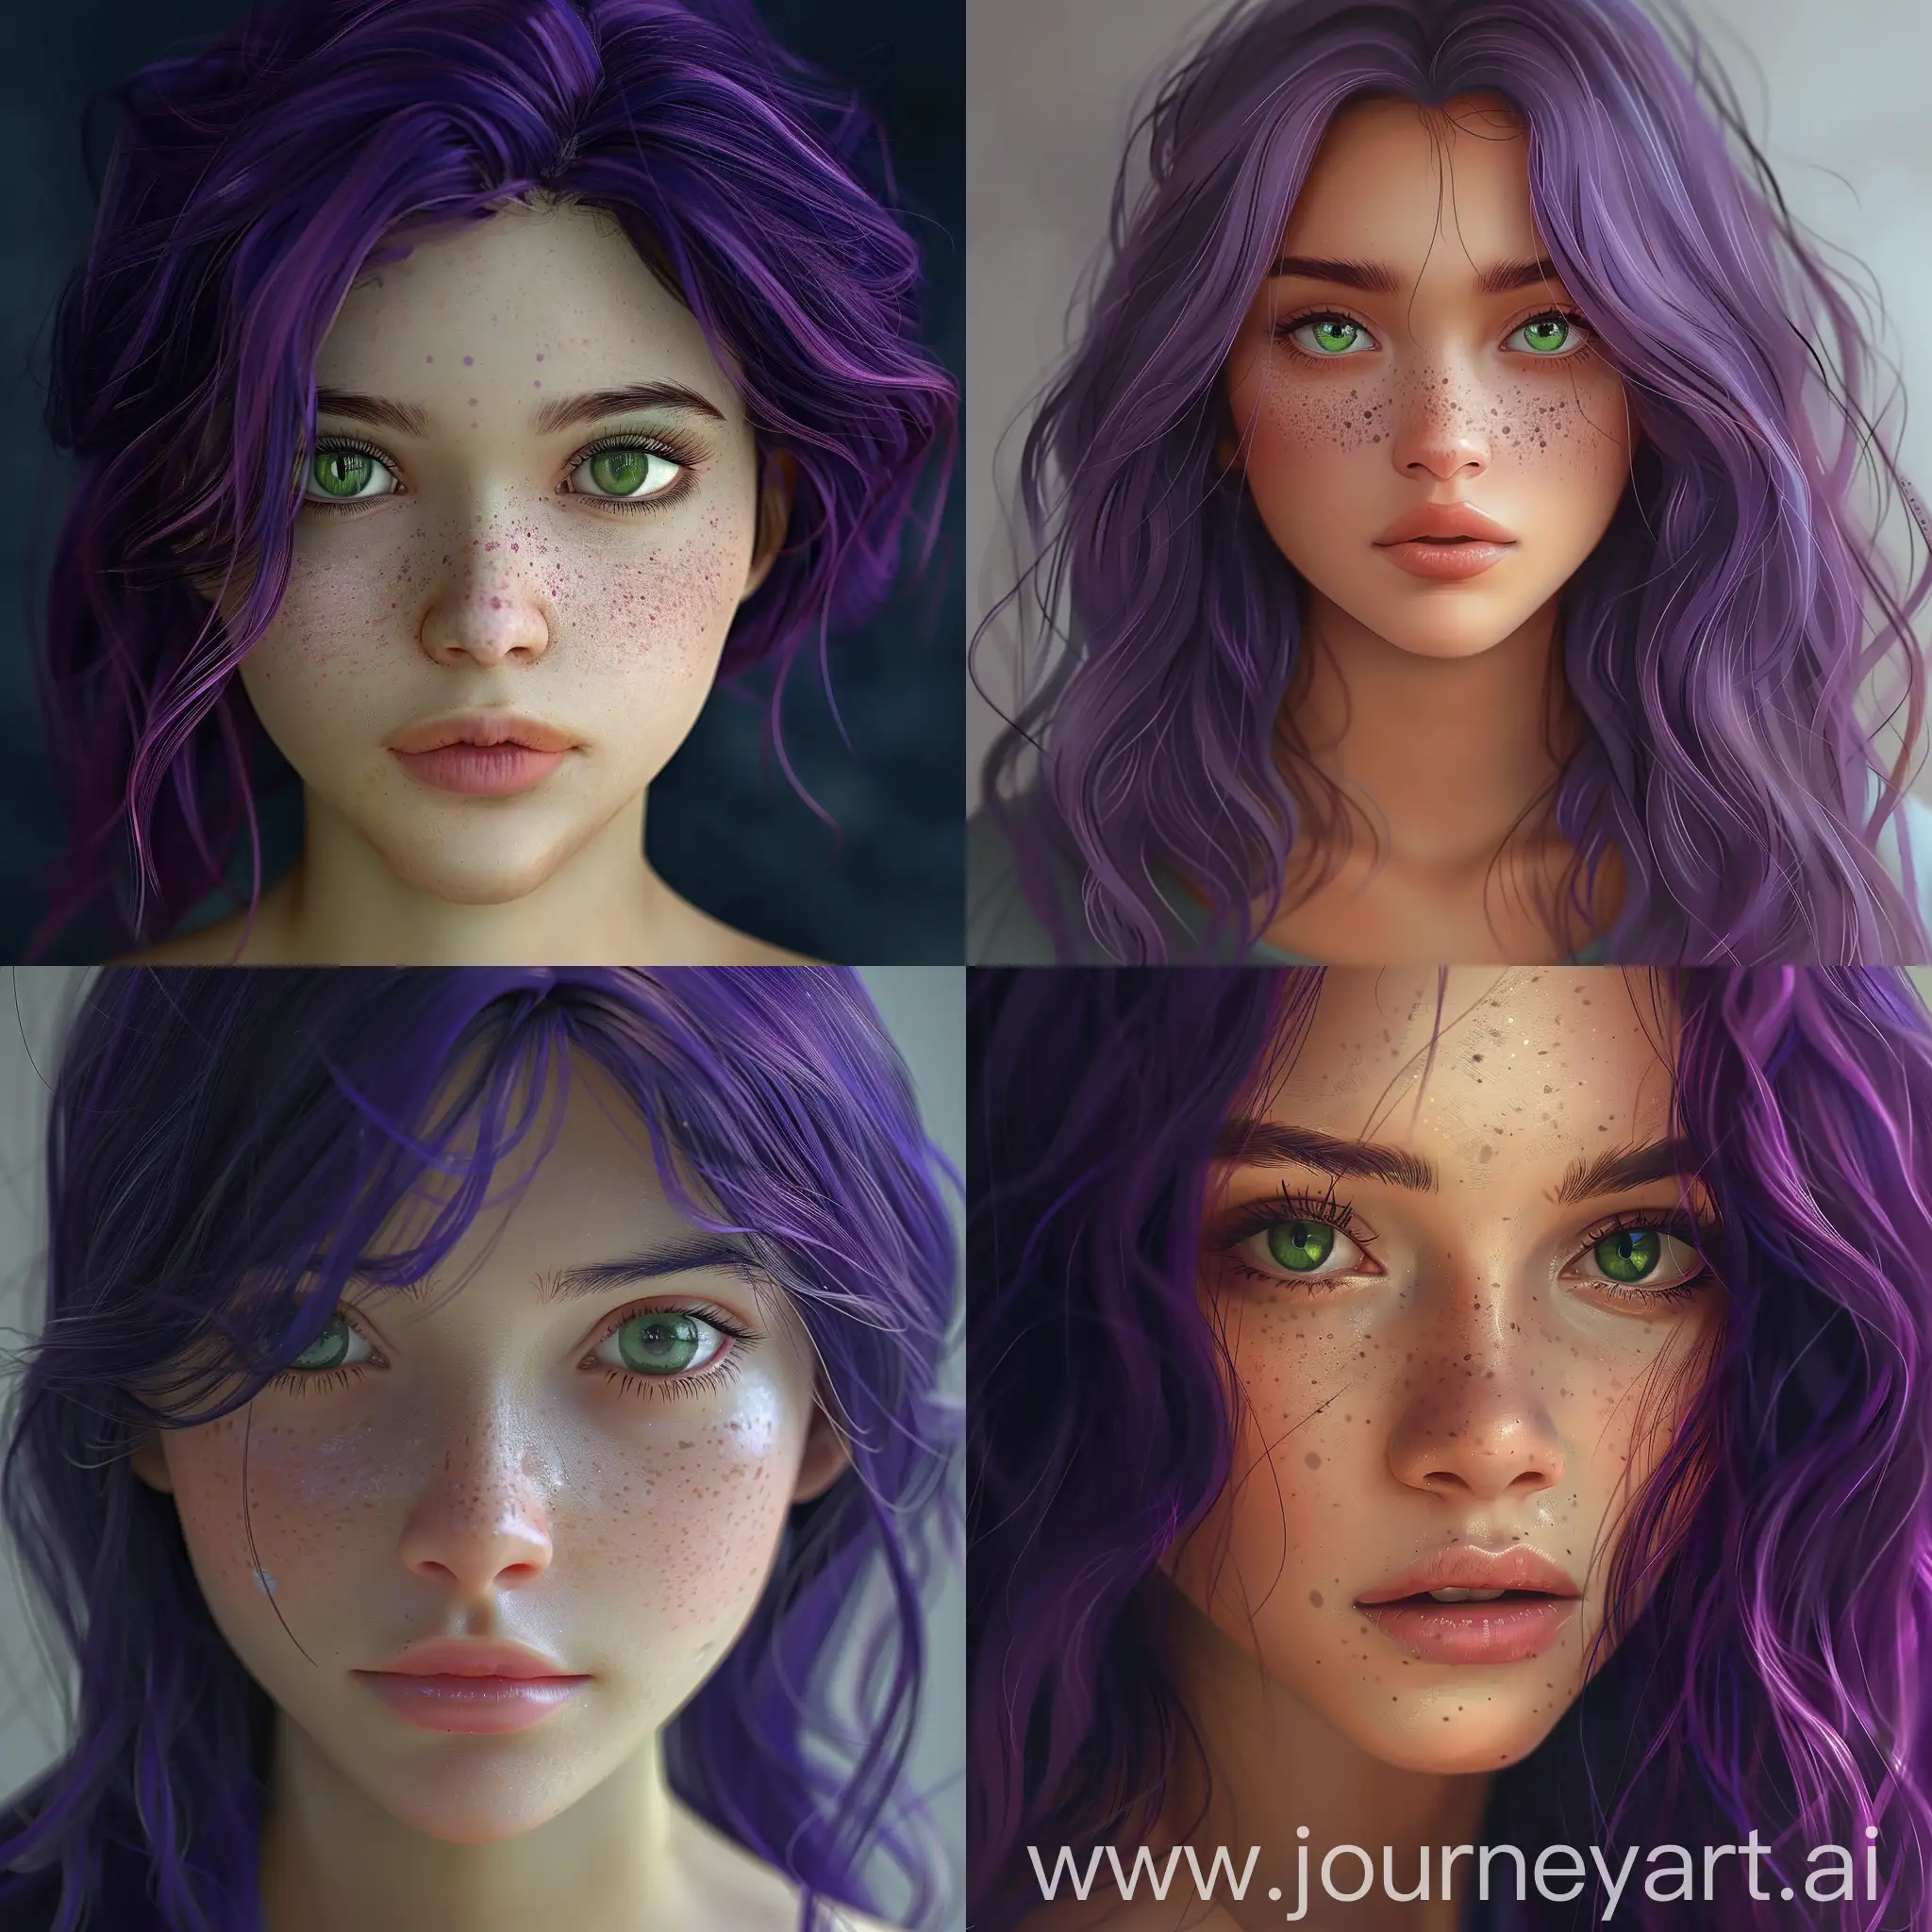 Iranian-Girl-with-Green-Eyes-and-Purple-Hair-Portrait-of-Youthful-Beauty